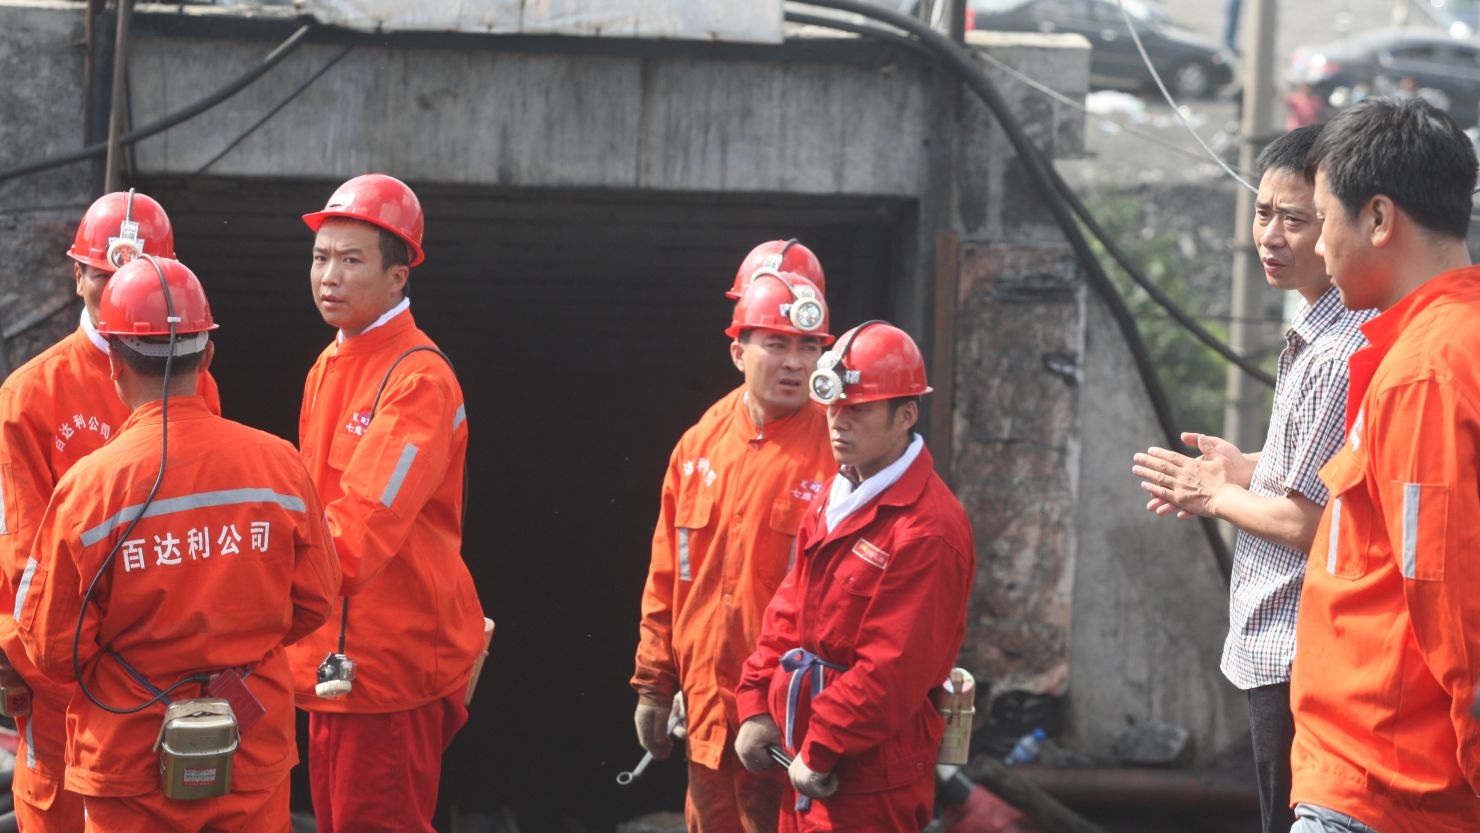 Rescuers prepare to enter a coal pit to rescue trapped workers in Hengtai coal mine on August 24, 2011 in Qitaihe, China.